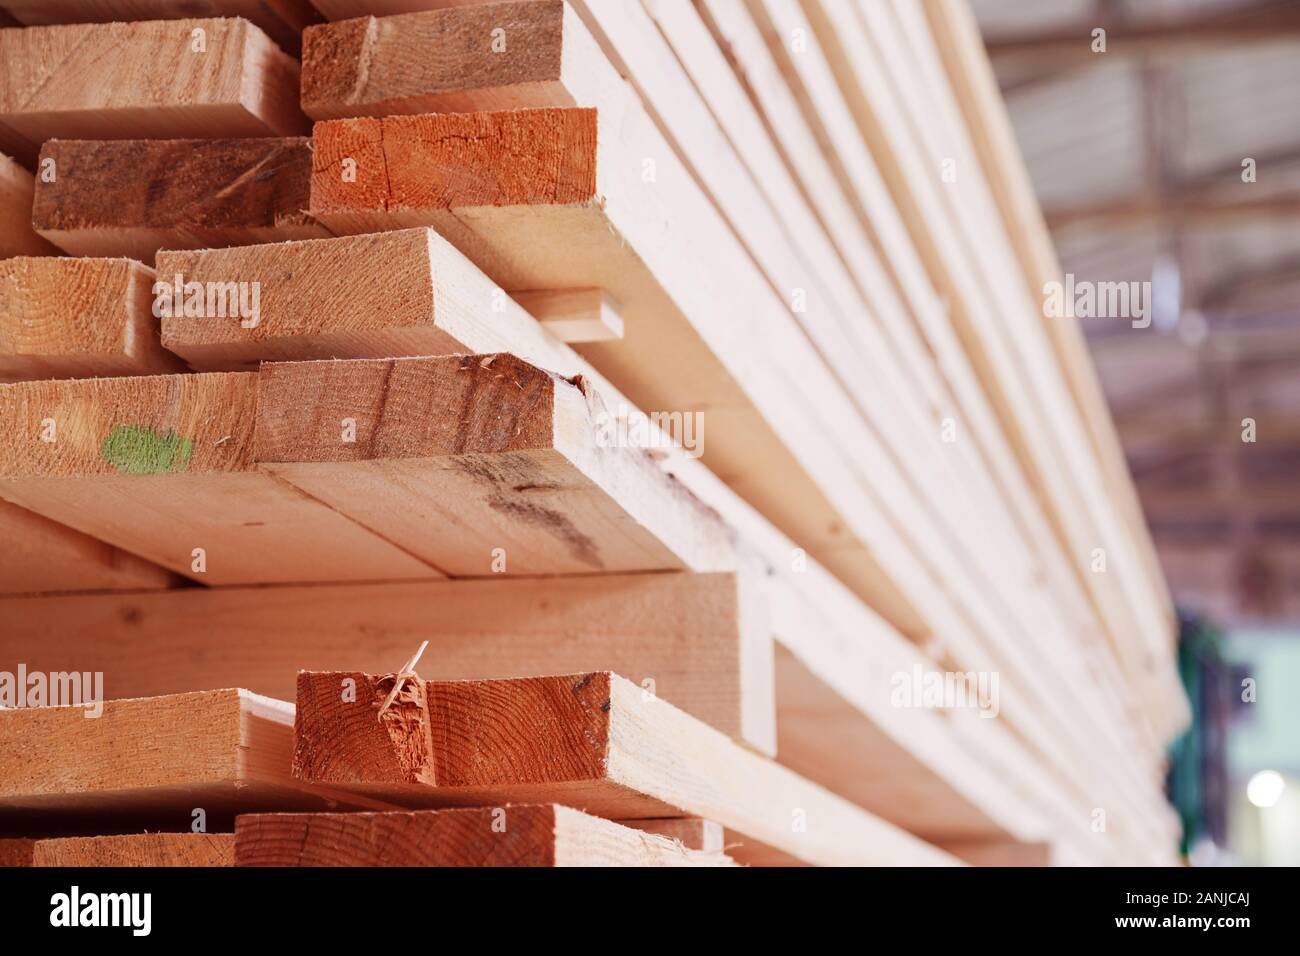 Warehouse or factory for sawing boards on sawmill indoors. Wood timber stack of wooden blanks construction material. Logging Industry. Stock Photo